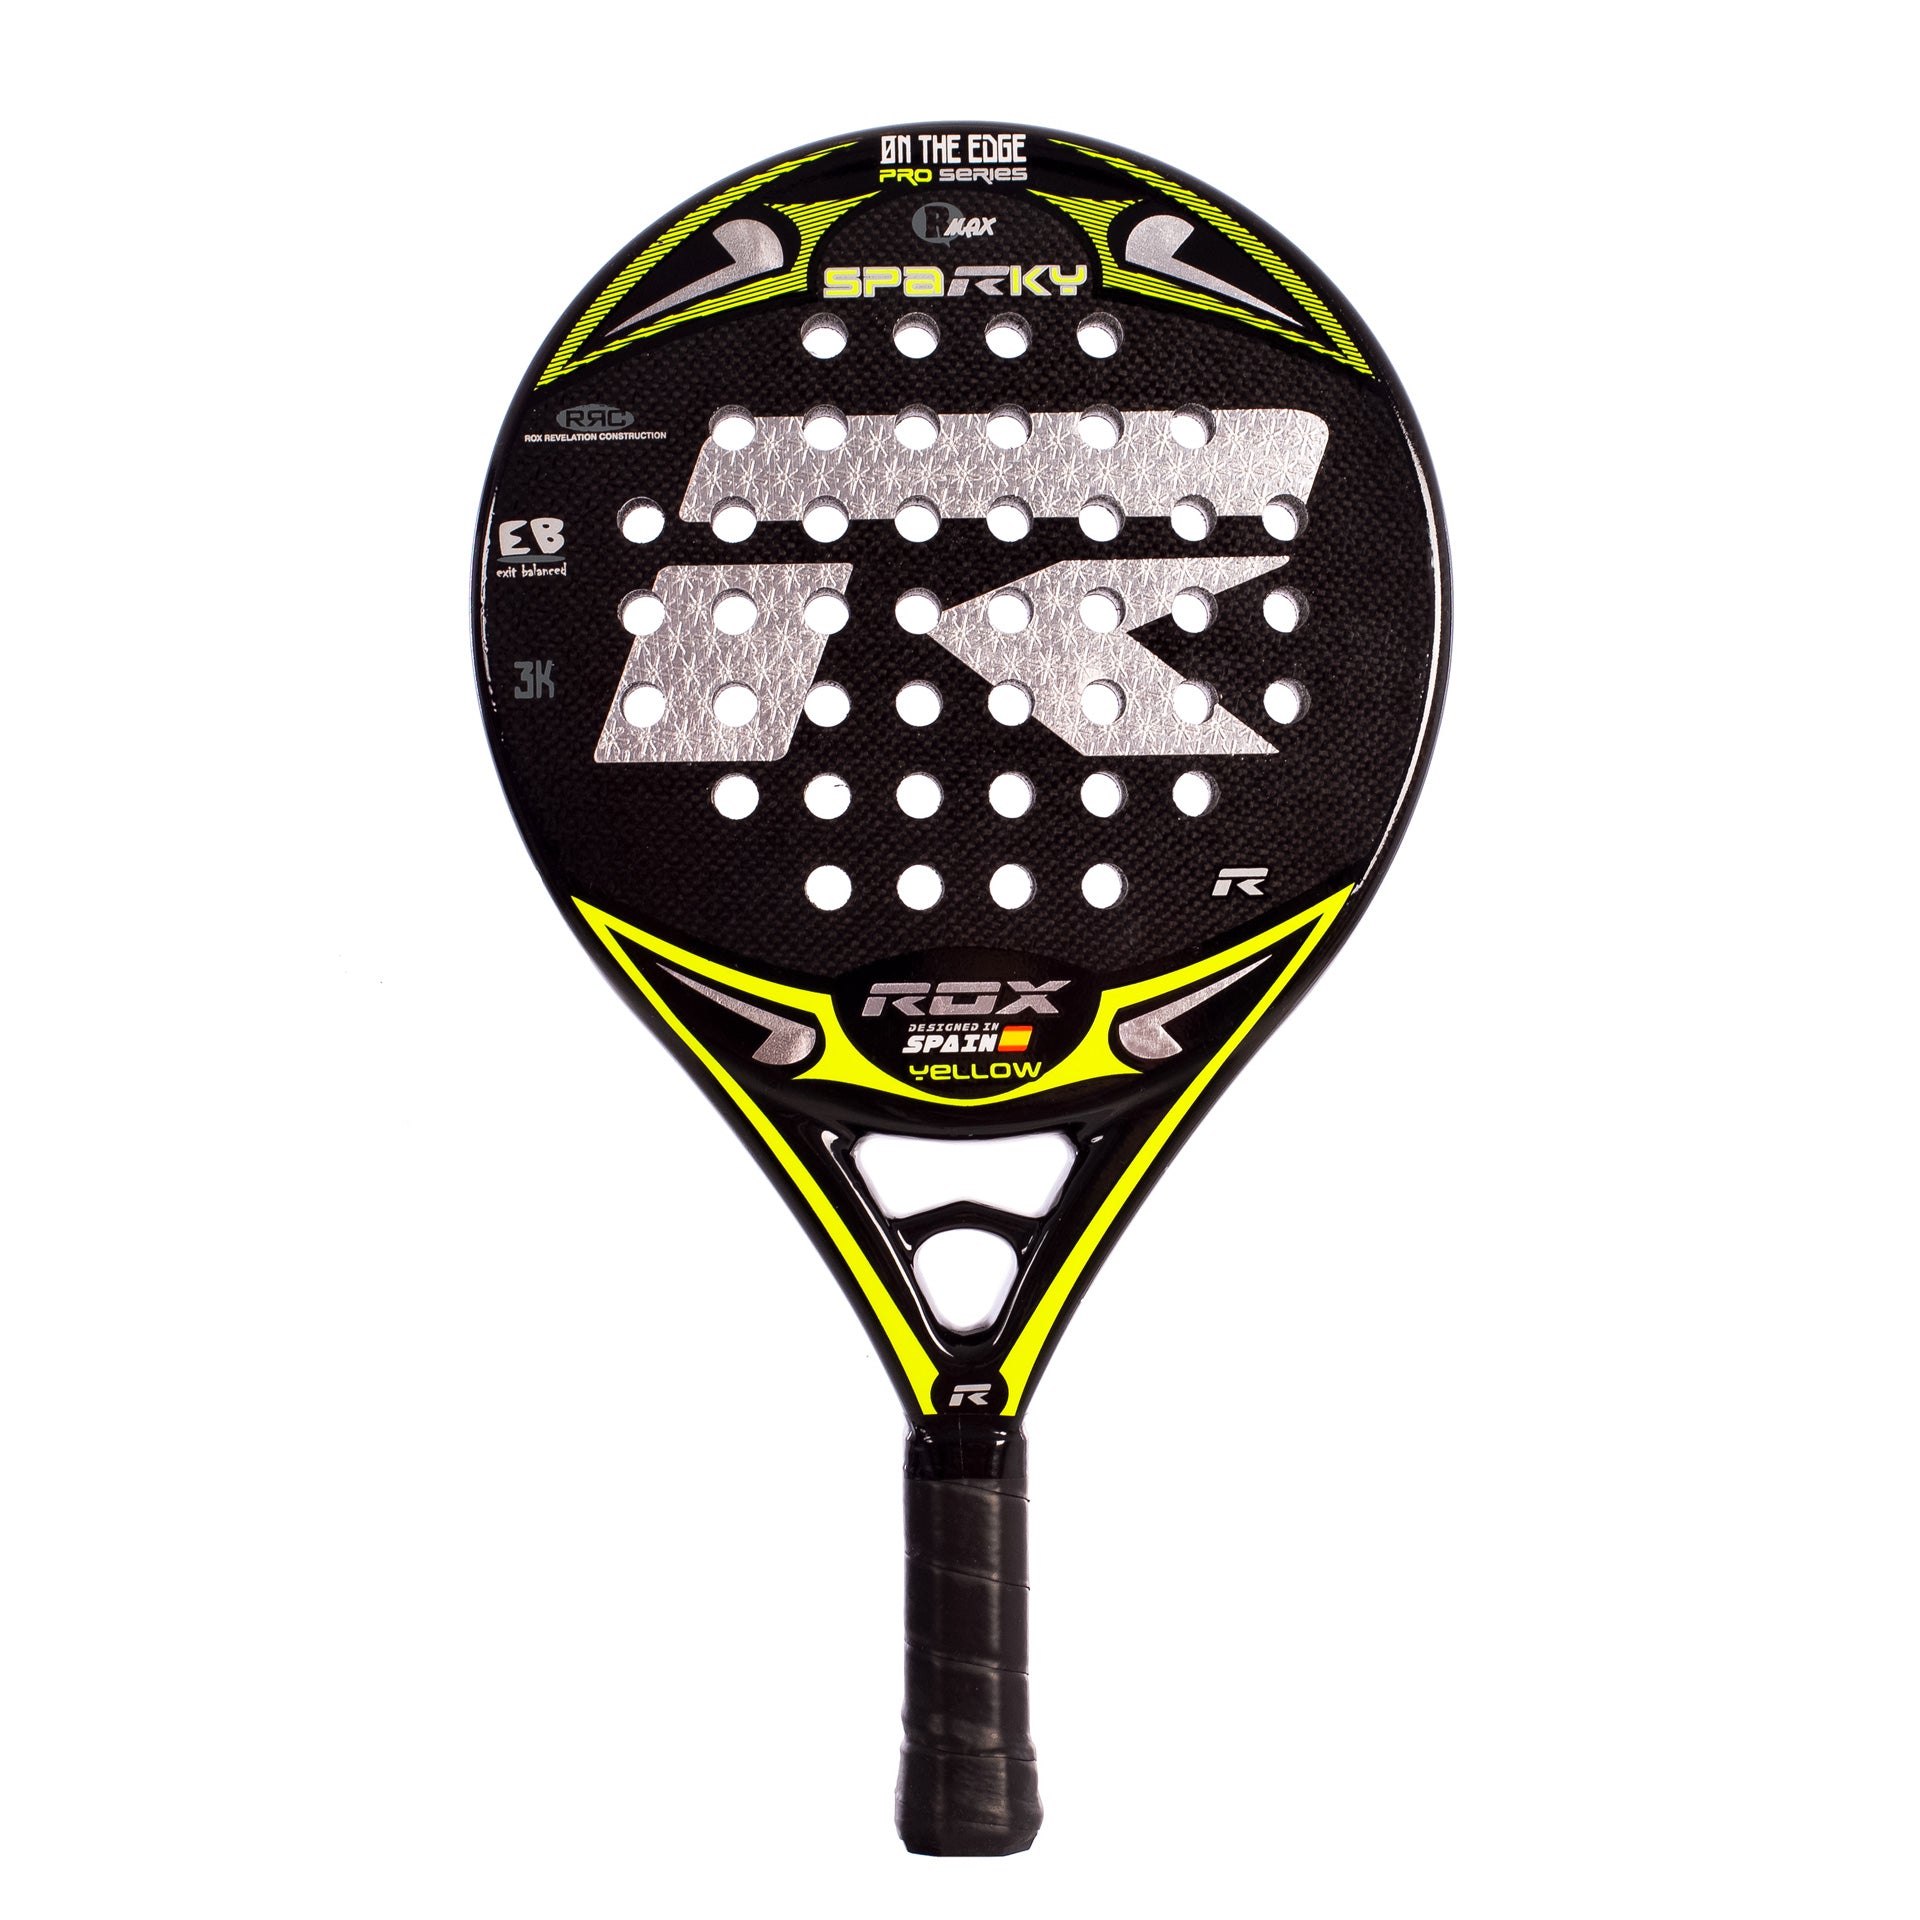 Pala Pádel Rox R-sparky Yellow UNICA 8